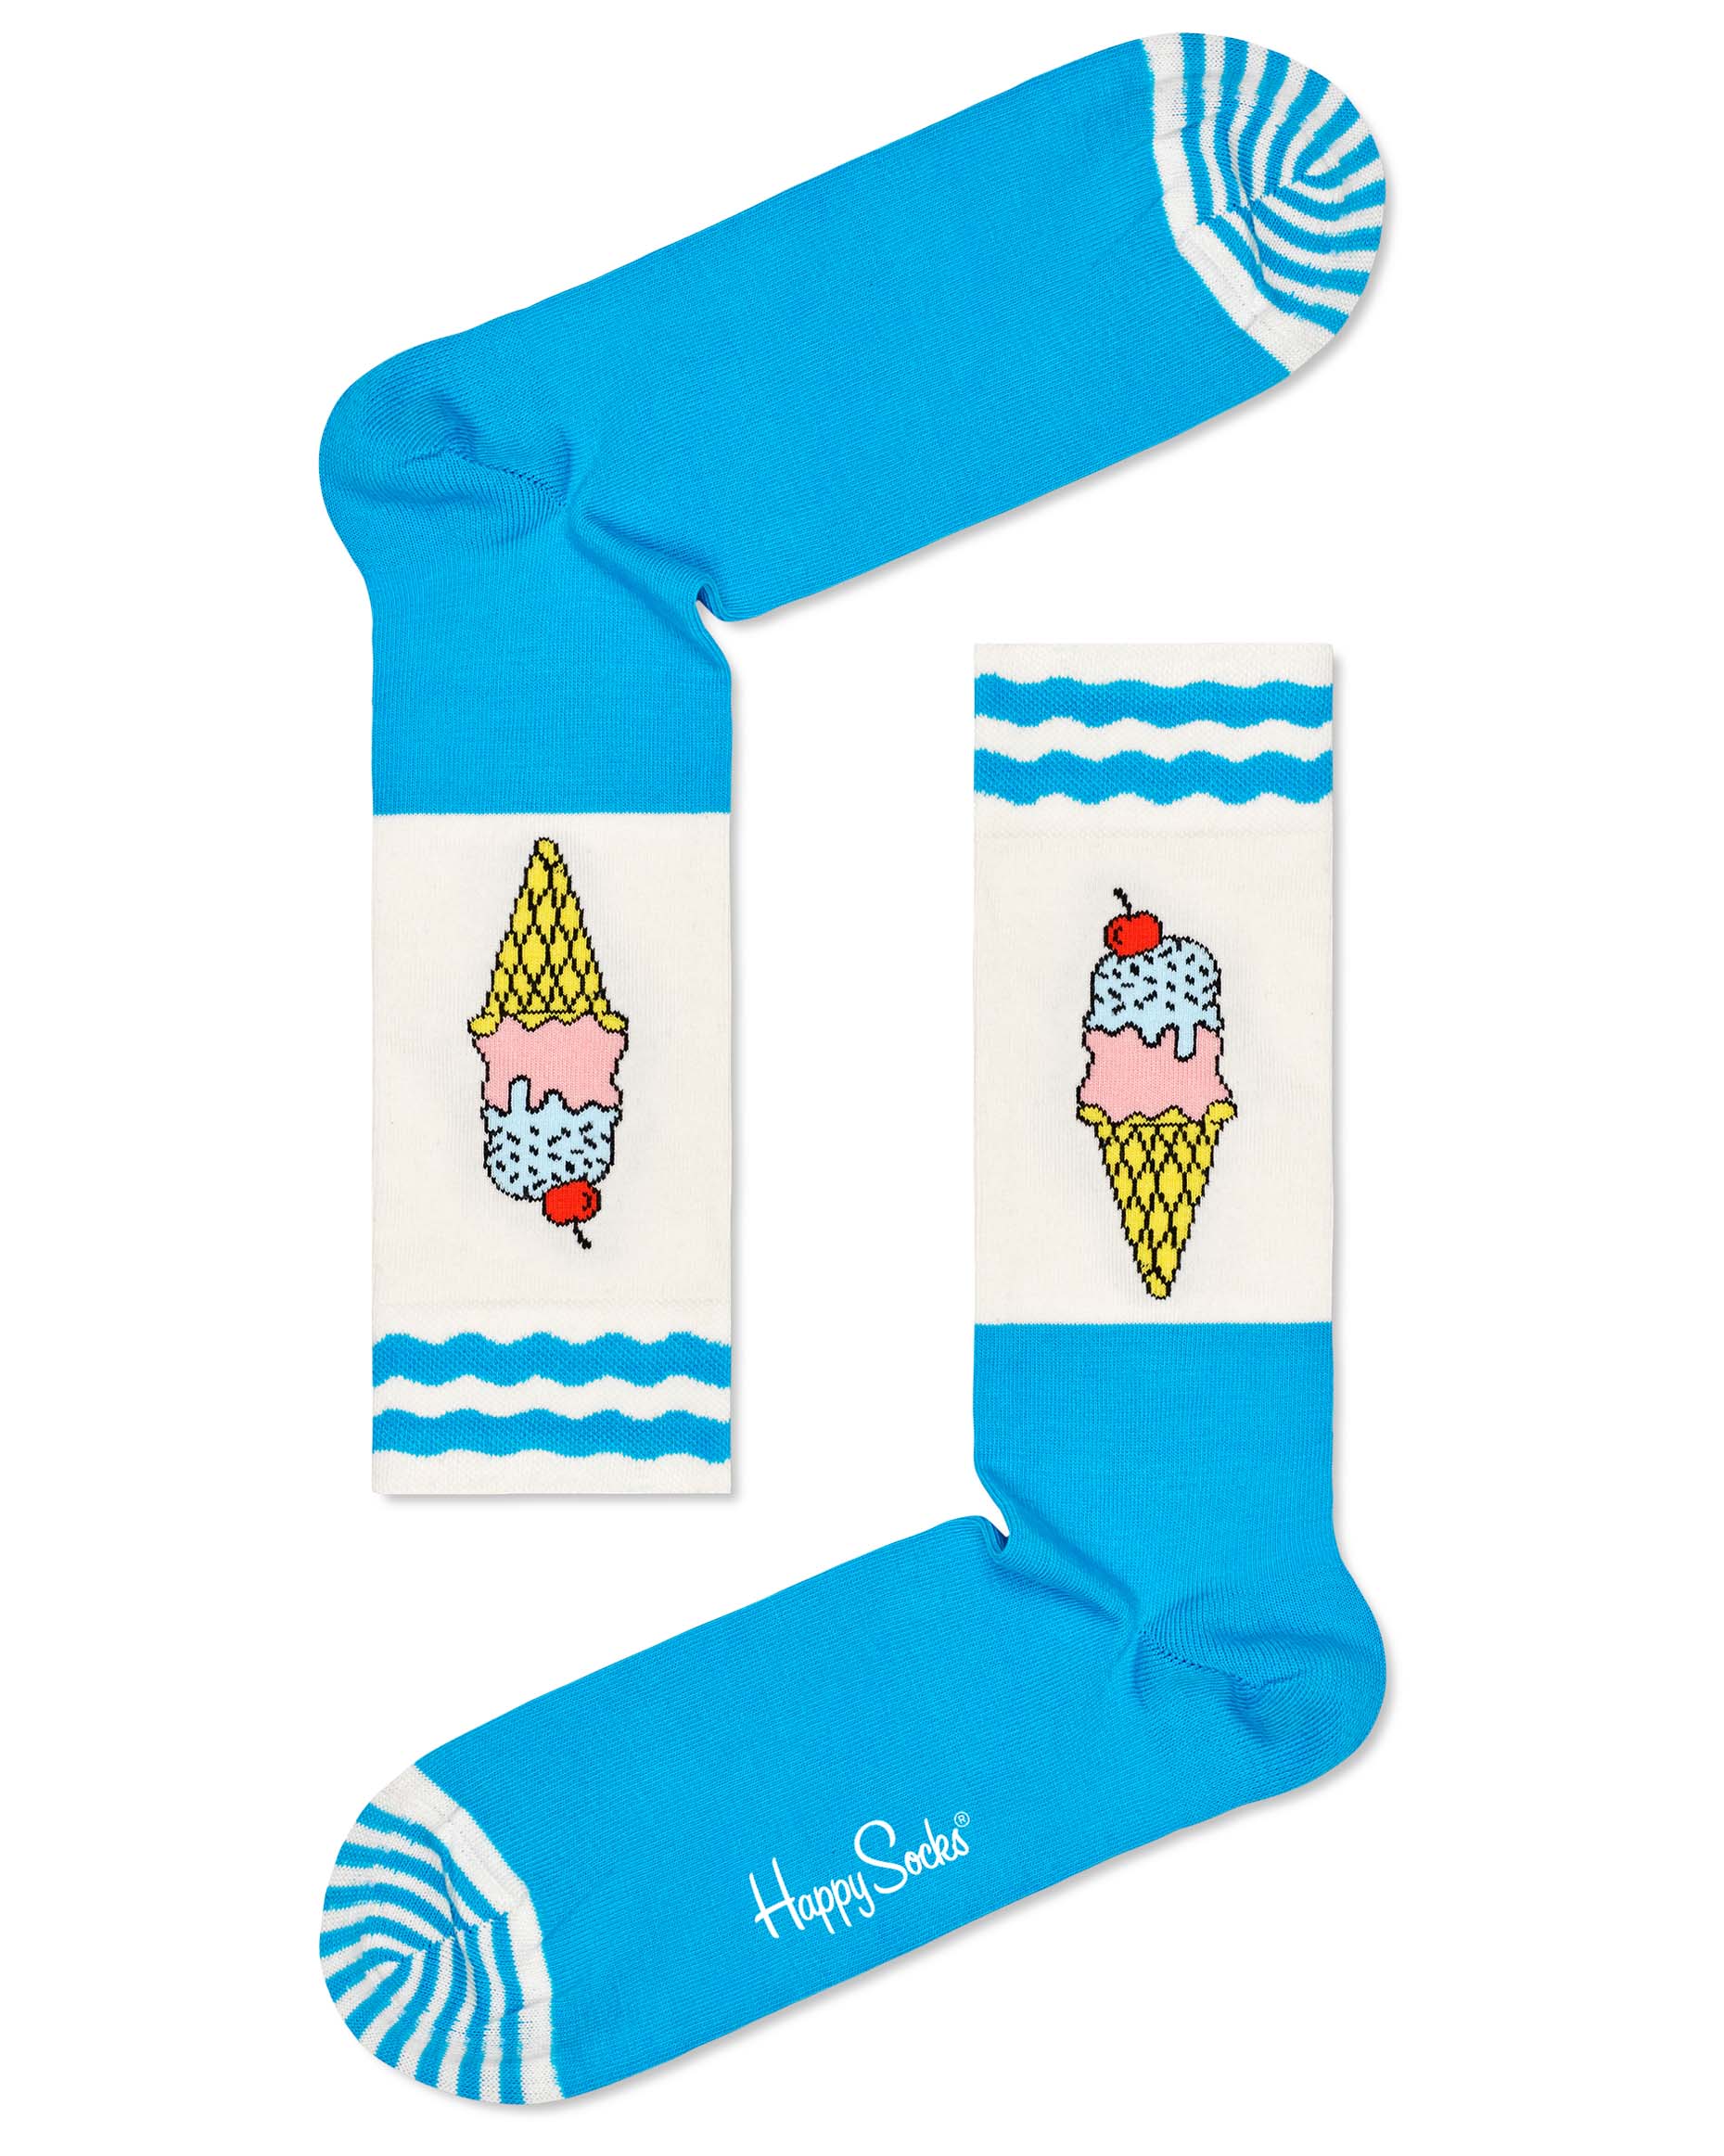 Happy Socks CRE01-6300 Ice Cream Sock - Ocean blue cotton mix crew length ankle socks with an ivory top, ice-cream cone motif and blue wavy double striped cuff and striped toe.